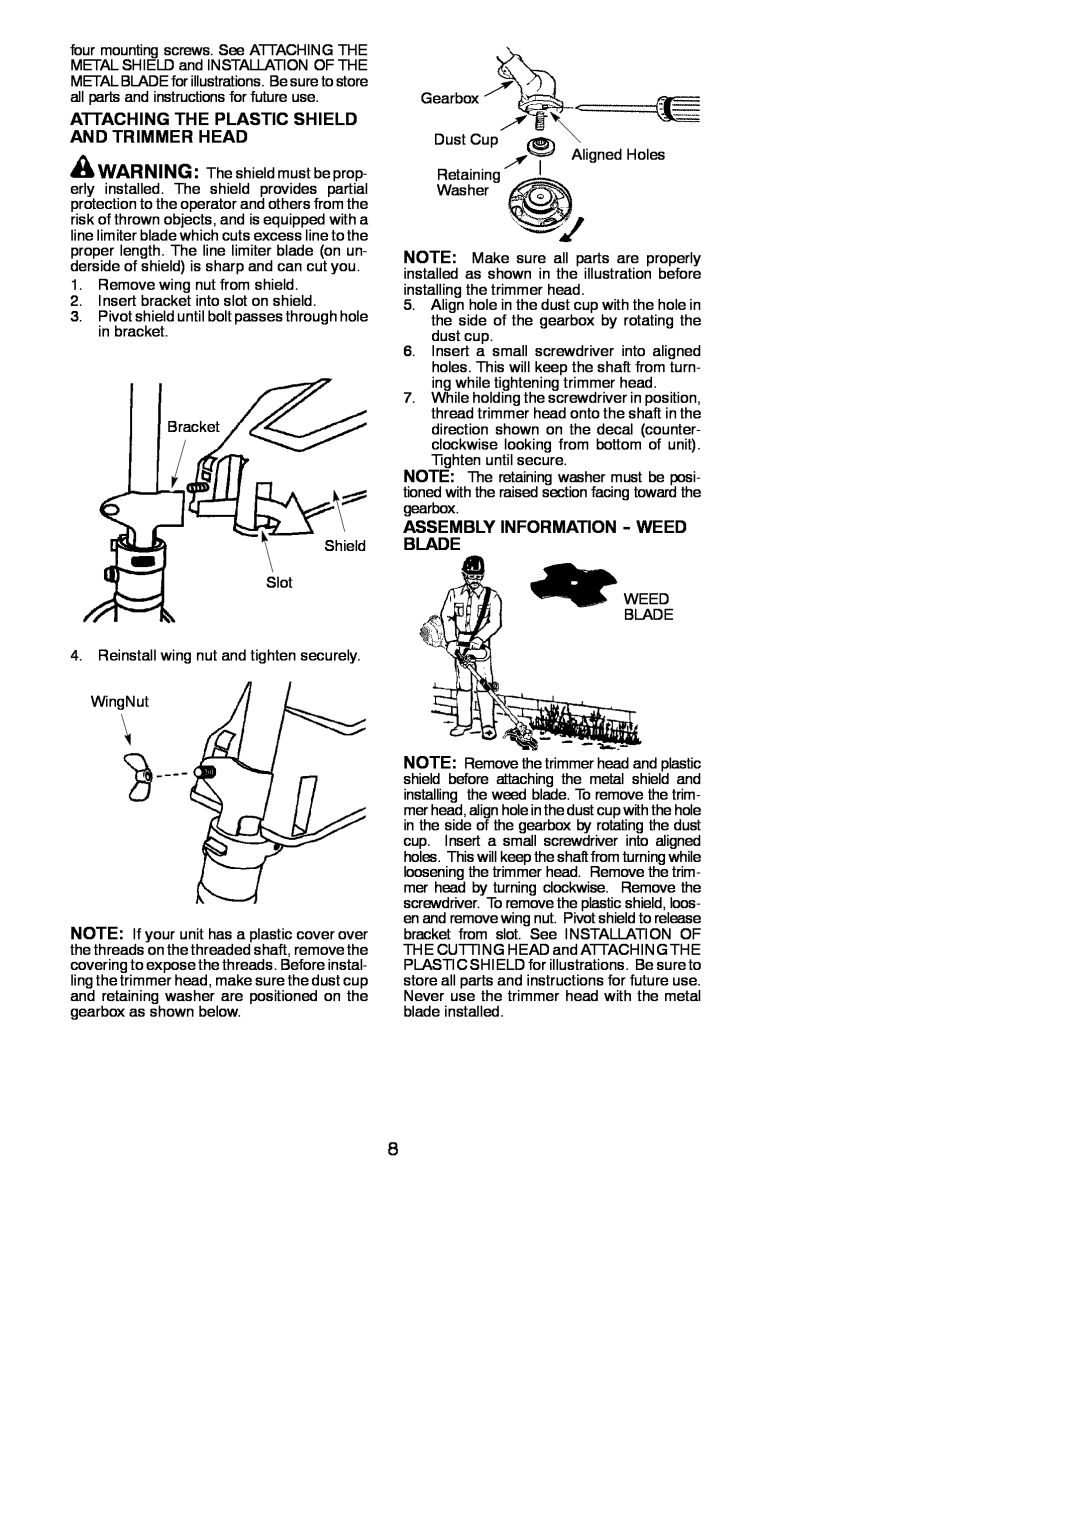 Poulan 545186843 instruction manual Attaching The Plastic Shield And Trimmer Head, Assembly Information - Weed Blade 